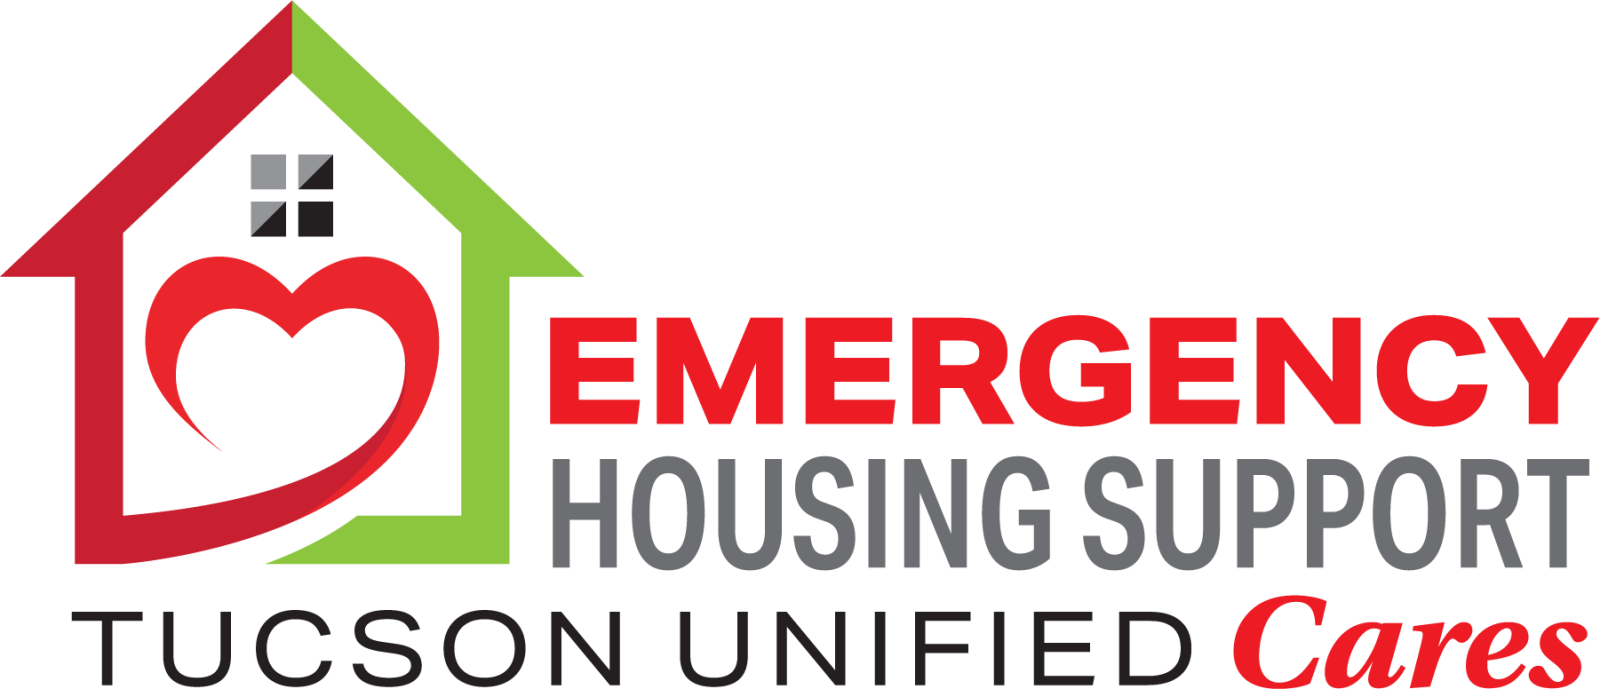 Emergency Housing Support Ƶapp Unified Cares logo